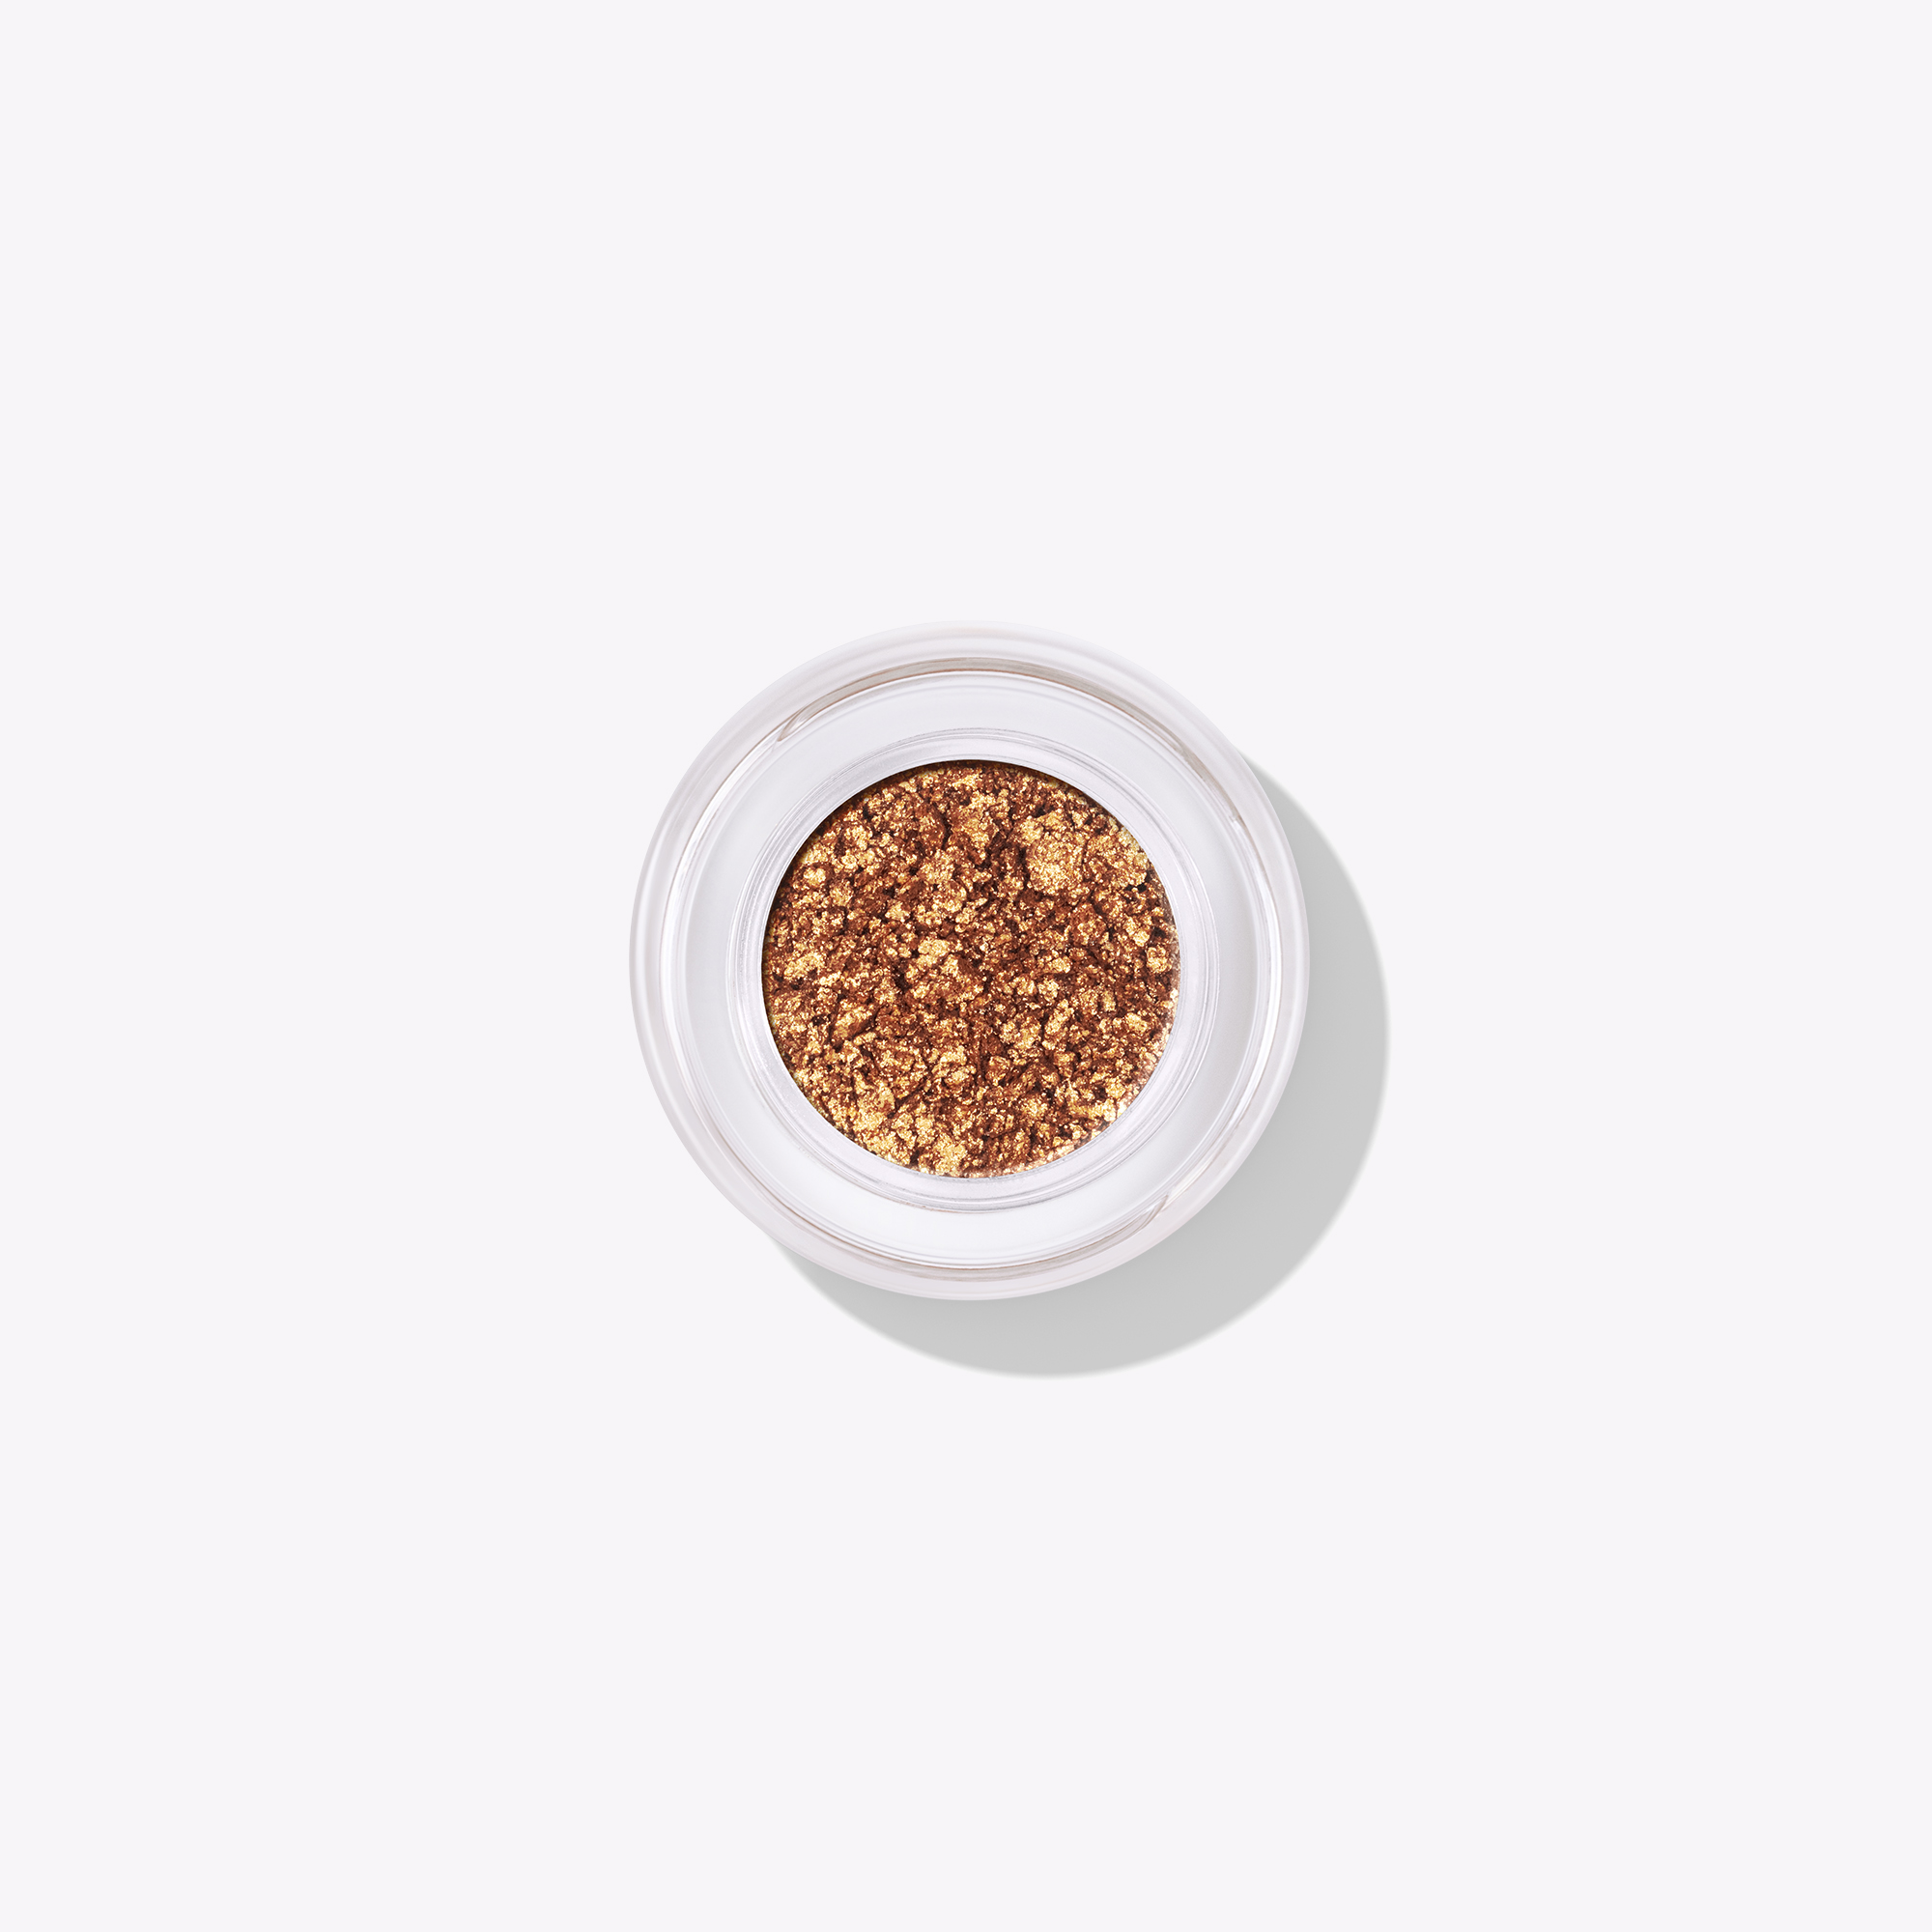 Tarte Cosmetics Chrome Paint Shadow Pot In Brown